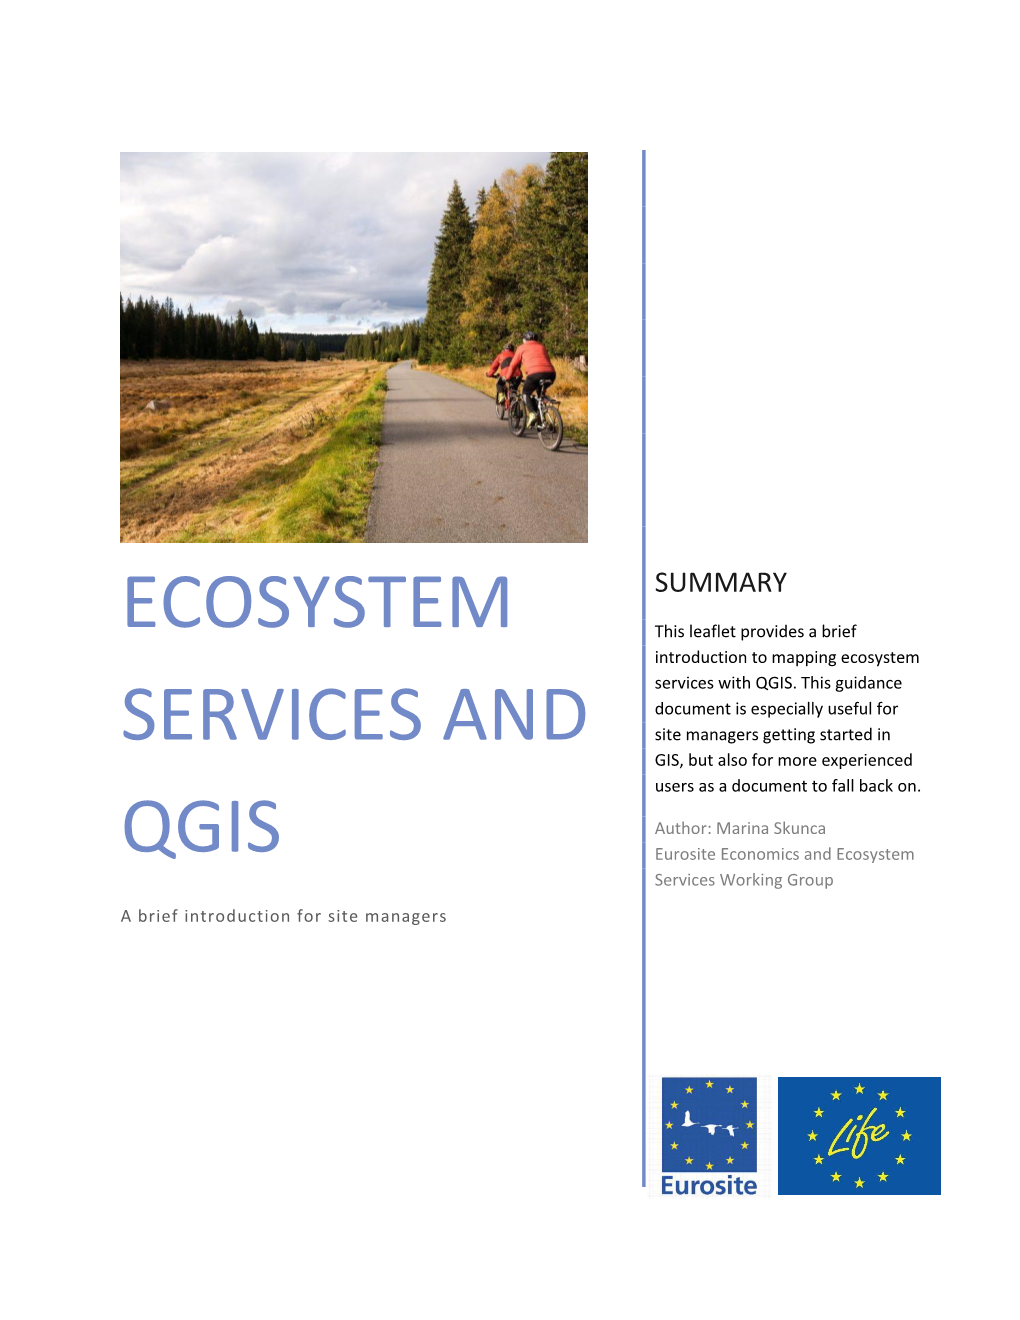 Ecosystem Services and QGIS Guidance